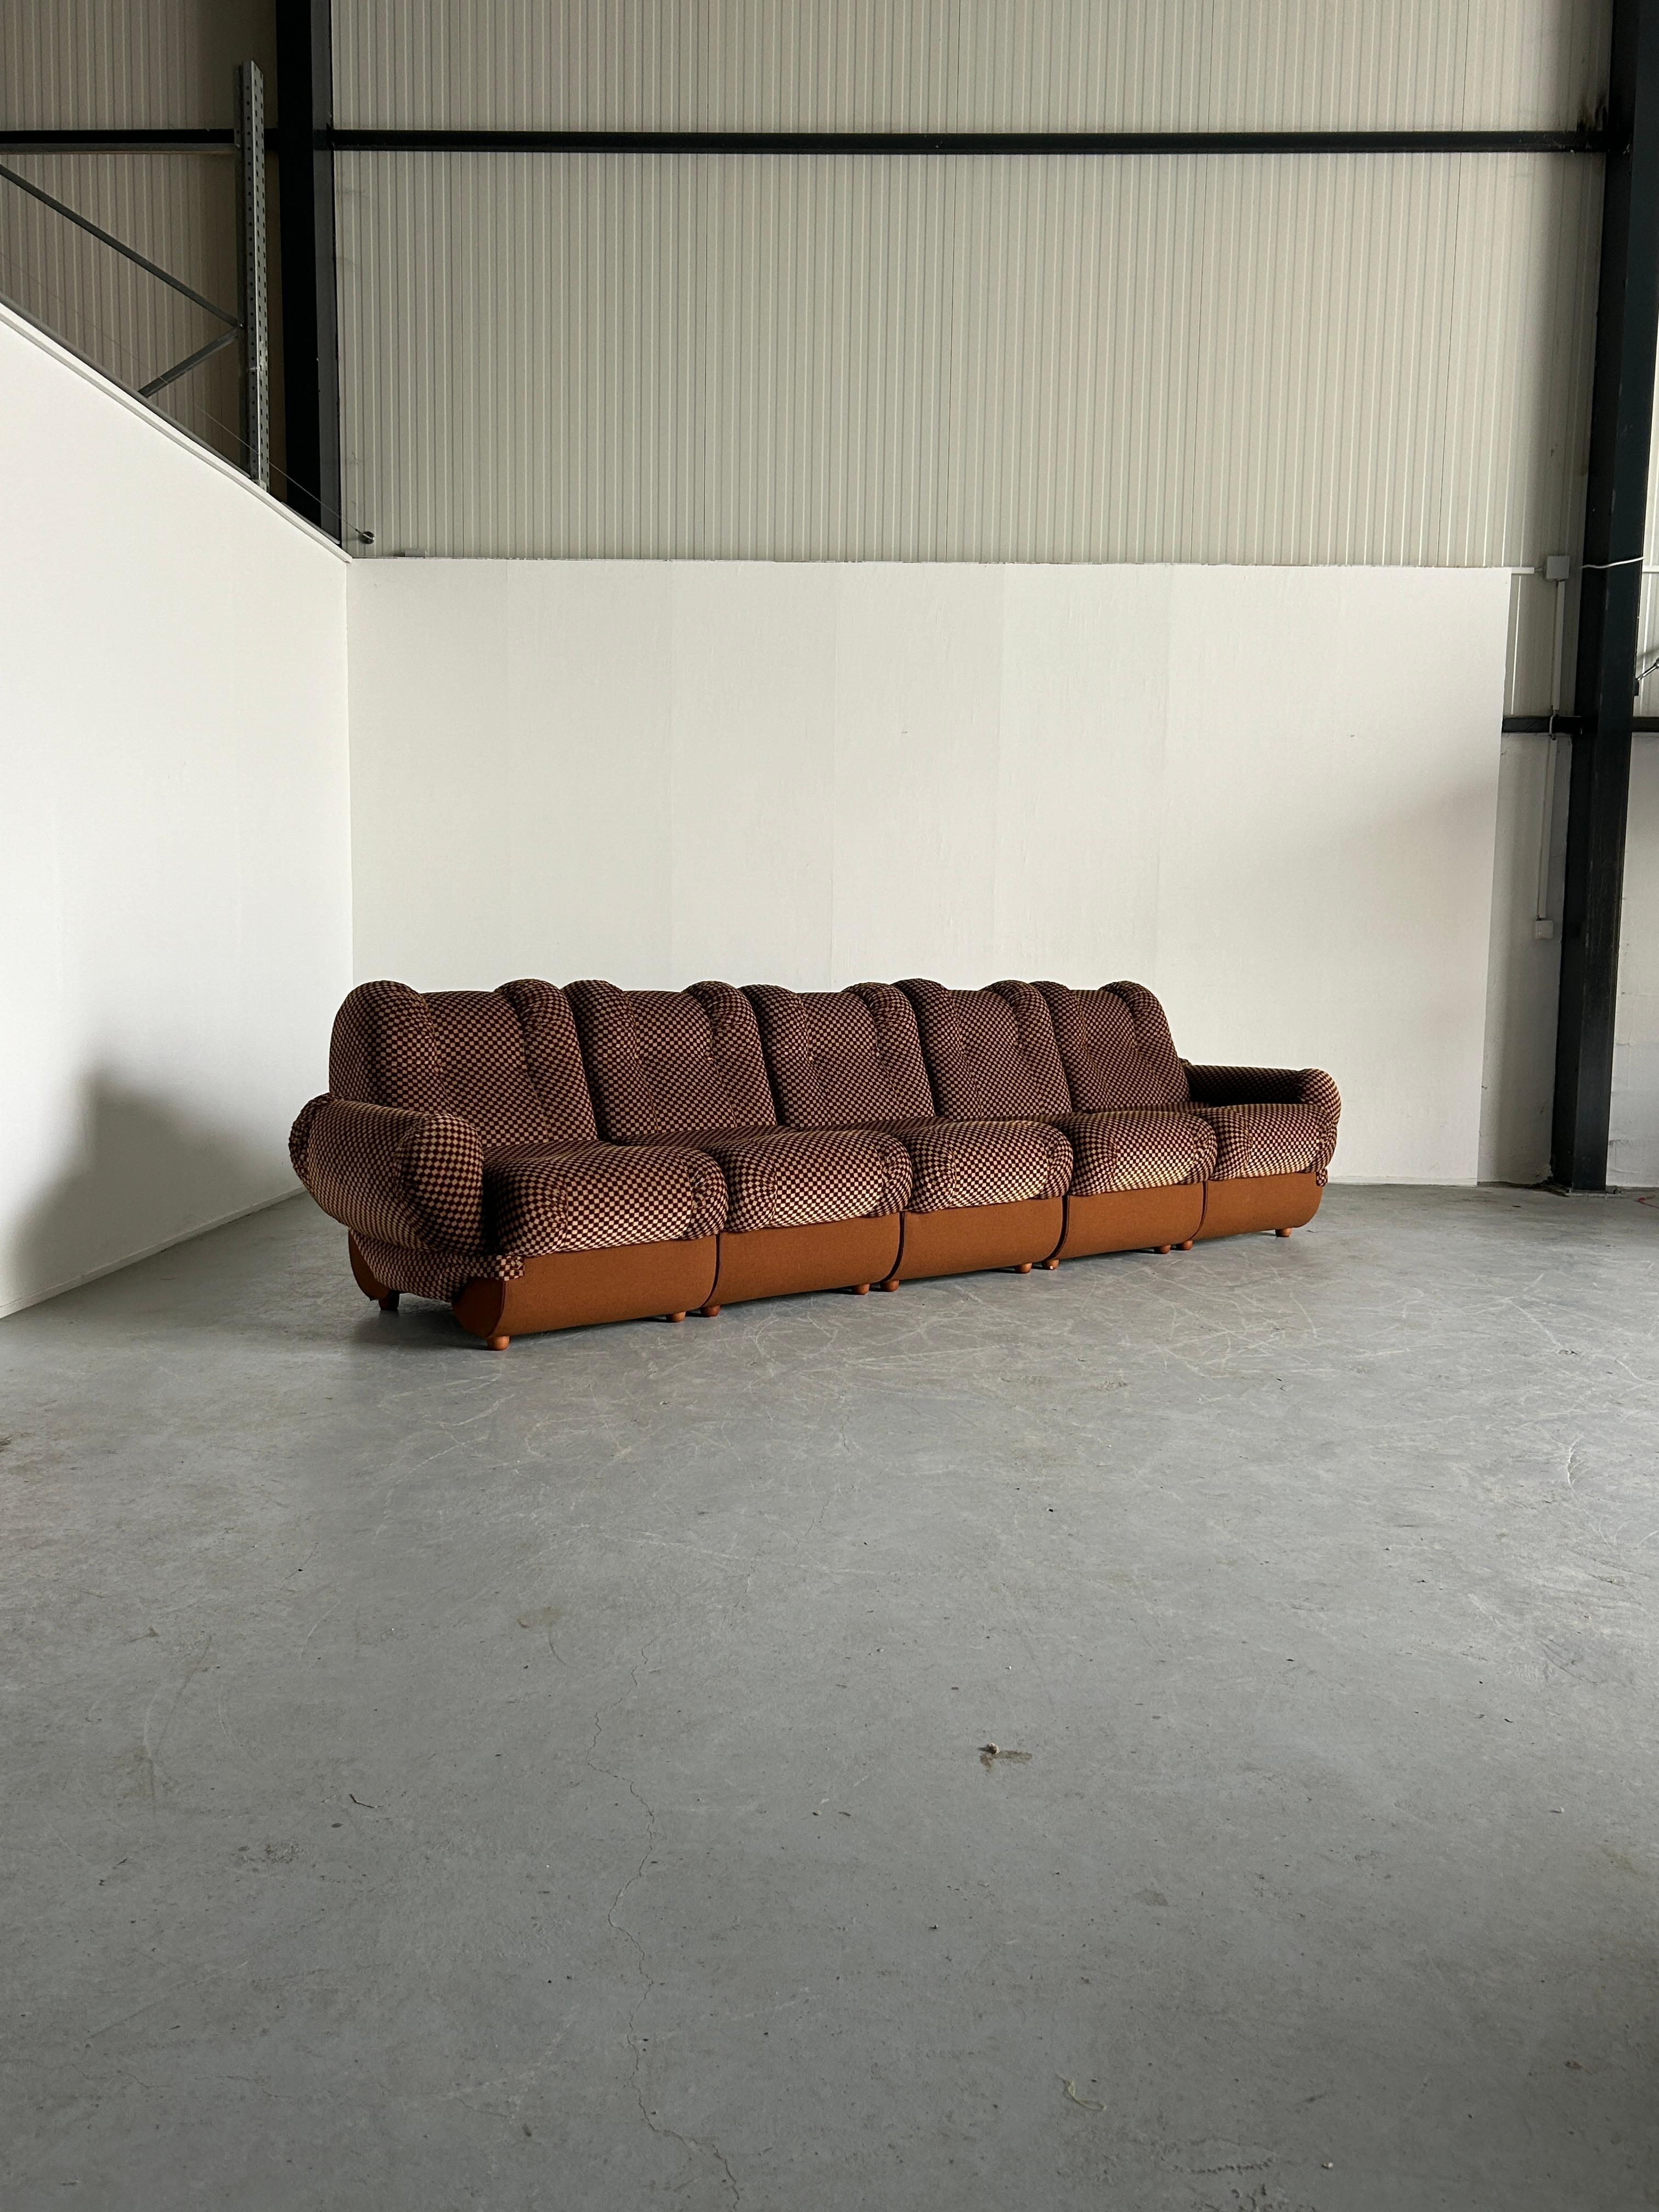 A beautiful five-piece Mid-Century-Modern modular cloud sofa.
Late 1960s production, Italy.
Foam and wooden construction, thick velvet upholstery.

In excellent vintage condition with minimal expected signs of age, as indicated in the